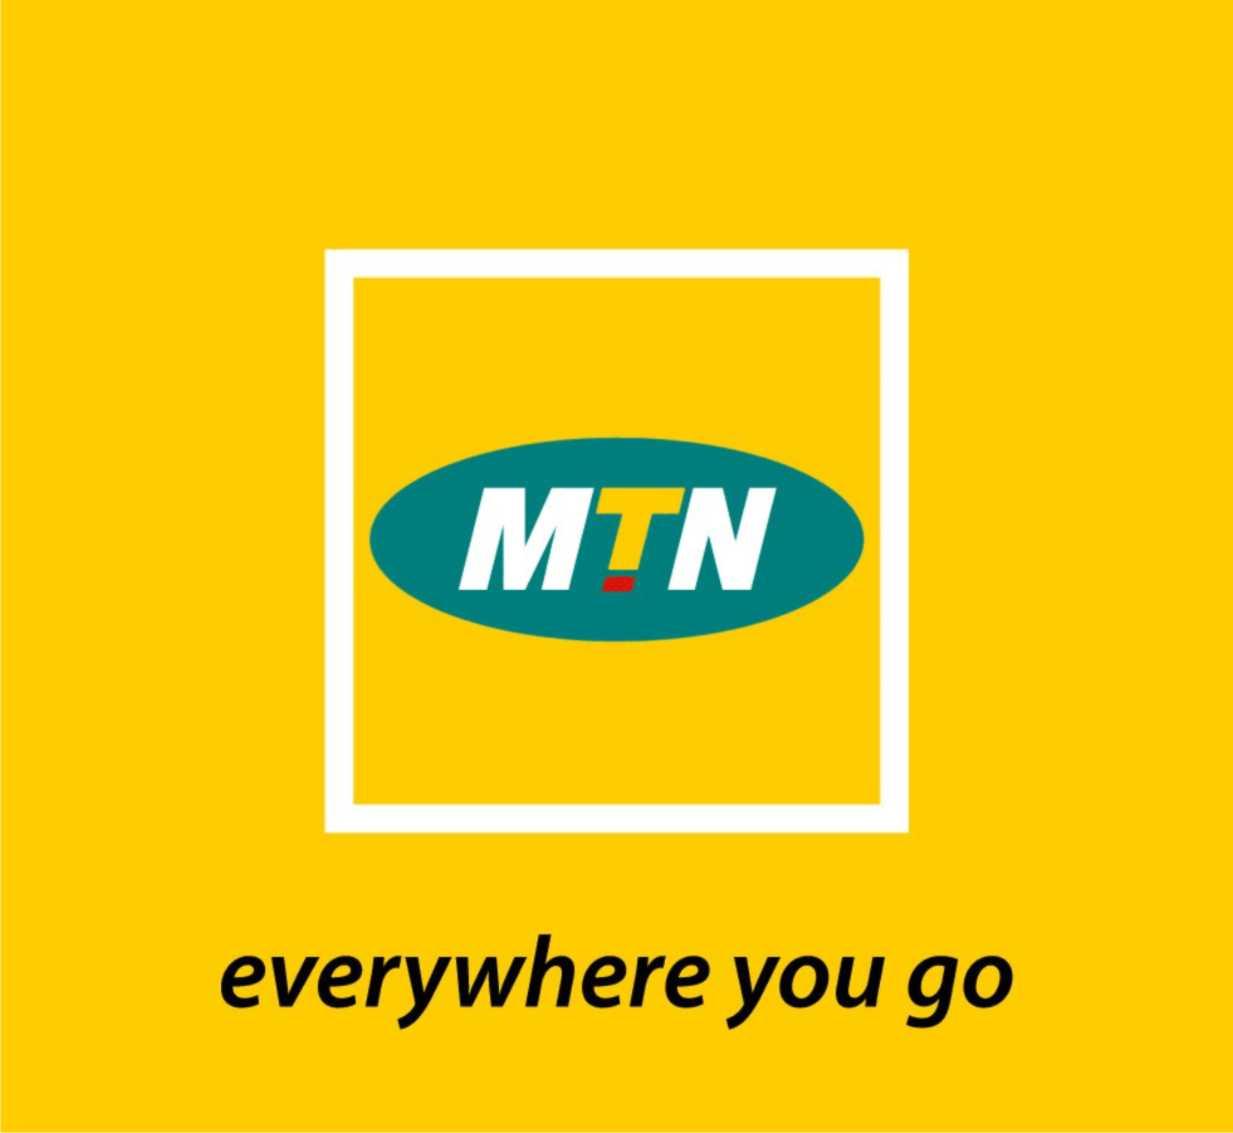 MTN Unlimited Free Browsing Cheat with Ha Tunnel Plus VPN